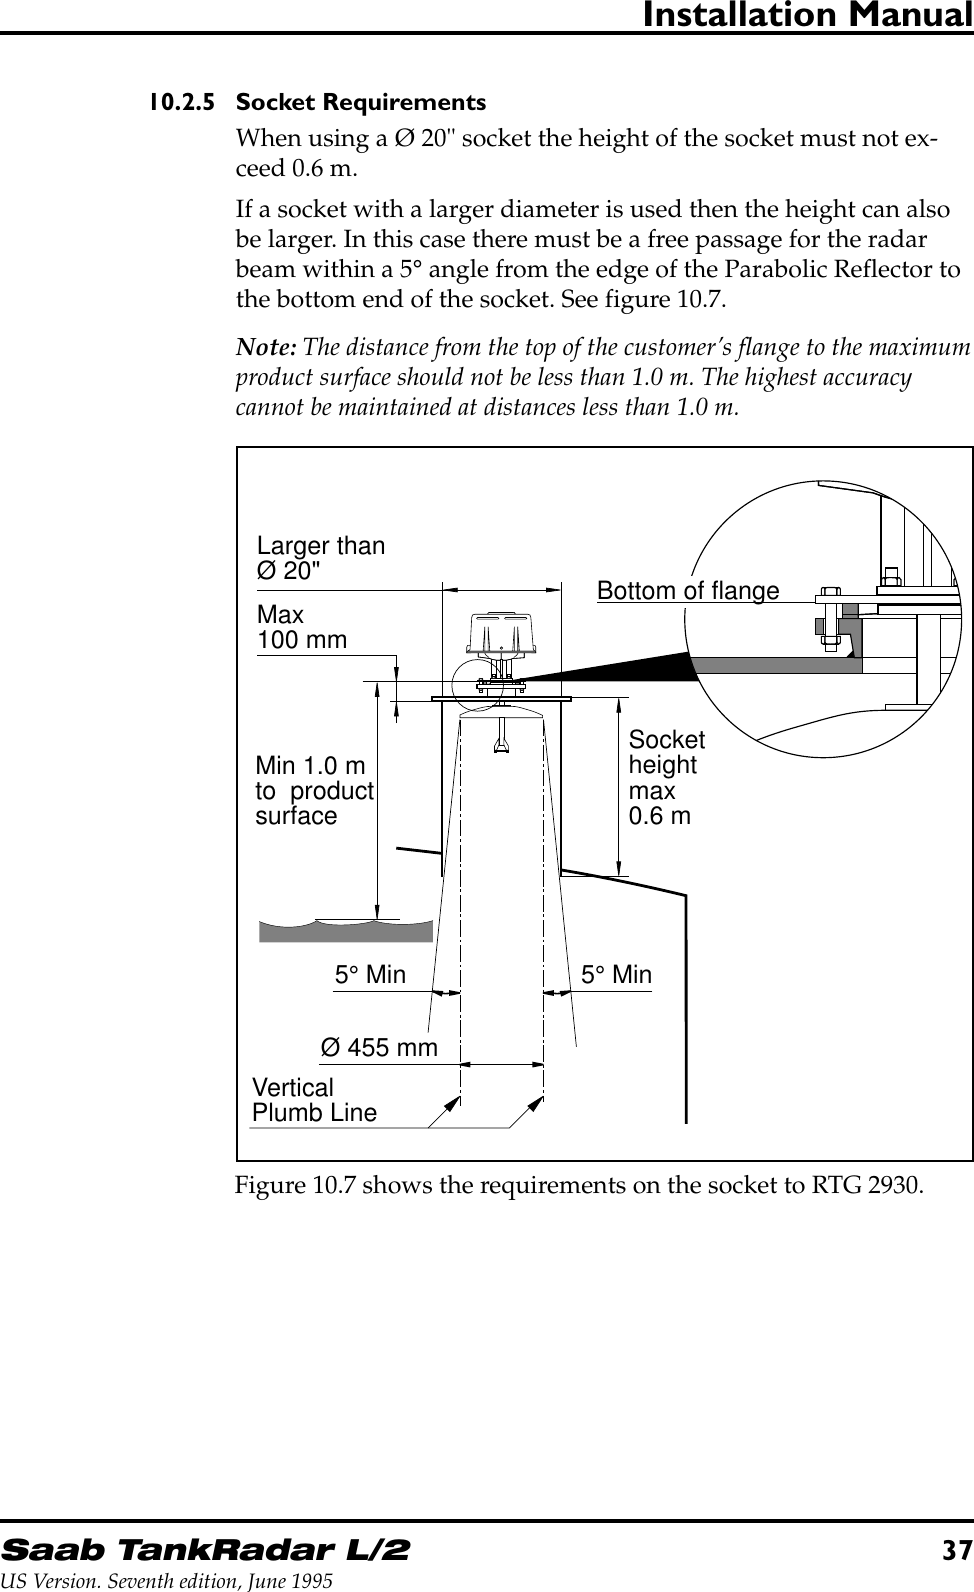 Saab TankRadar L/237US Version. Seventh edition, June 1995Installation Manual10.2.5 Socket RequirementsWhen using a Ø 20&quot; socket the height of the socket must not ex-ceed 0.6 m.If a socket with a larger diameter is used then the height can alsobe larger. In this case there must be a free passage for the radarbeam within a 5° angle from the edge of the Parabolic Reflector tothe bottom end of the socket. See figure 10.7.Note: The distance from the top of the customer’s flange to the maximumproduct surface should not be less than 1.0 m. The highest accuracycannot be maintained at distances less than 1.0 m.5° Min5° MinVerticalPlumb LineØ 455 mmLarger thanØ 20&quot;Socketheightmax0.6 mMin 1.0 mto  productsurfaceMax100 mmBottom of flangeFigure 10.7 shows the requirements on the socket to RTG 2930.